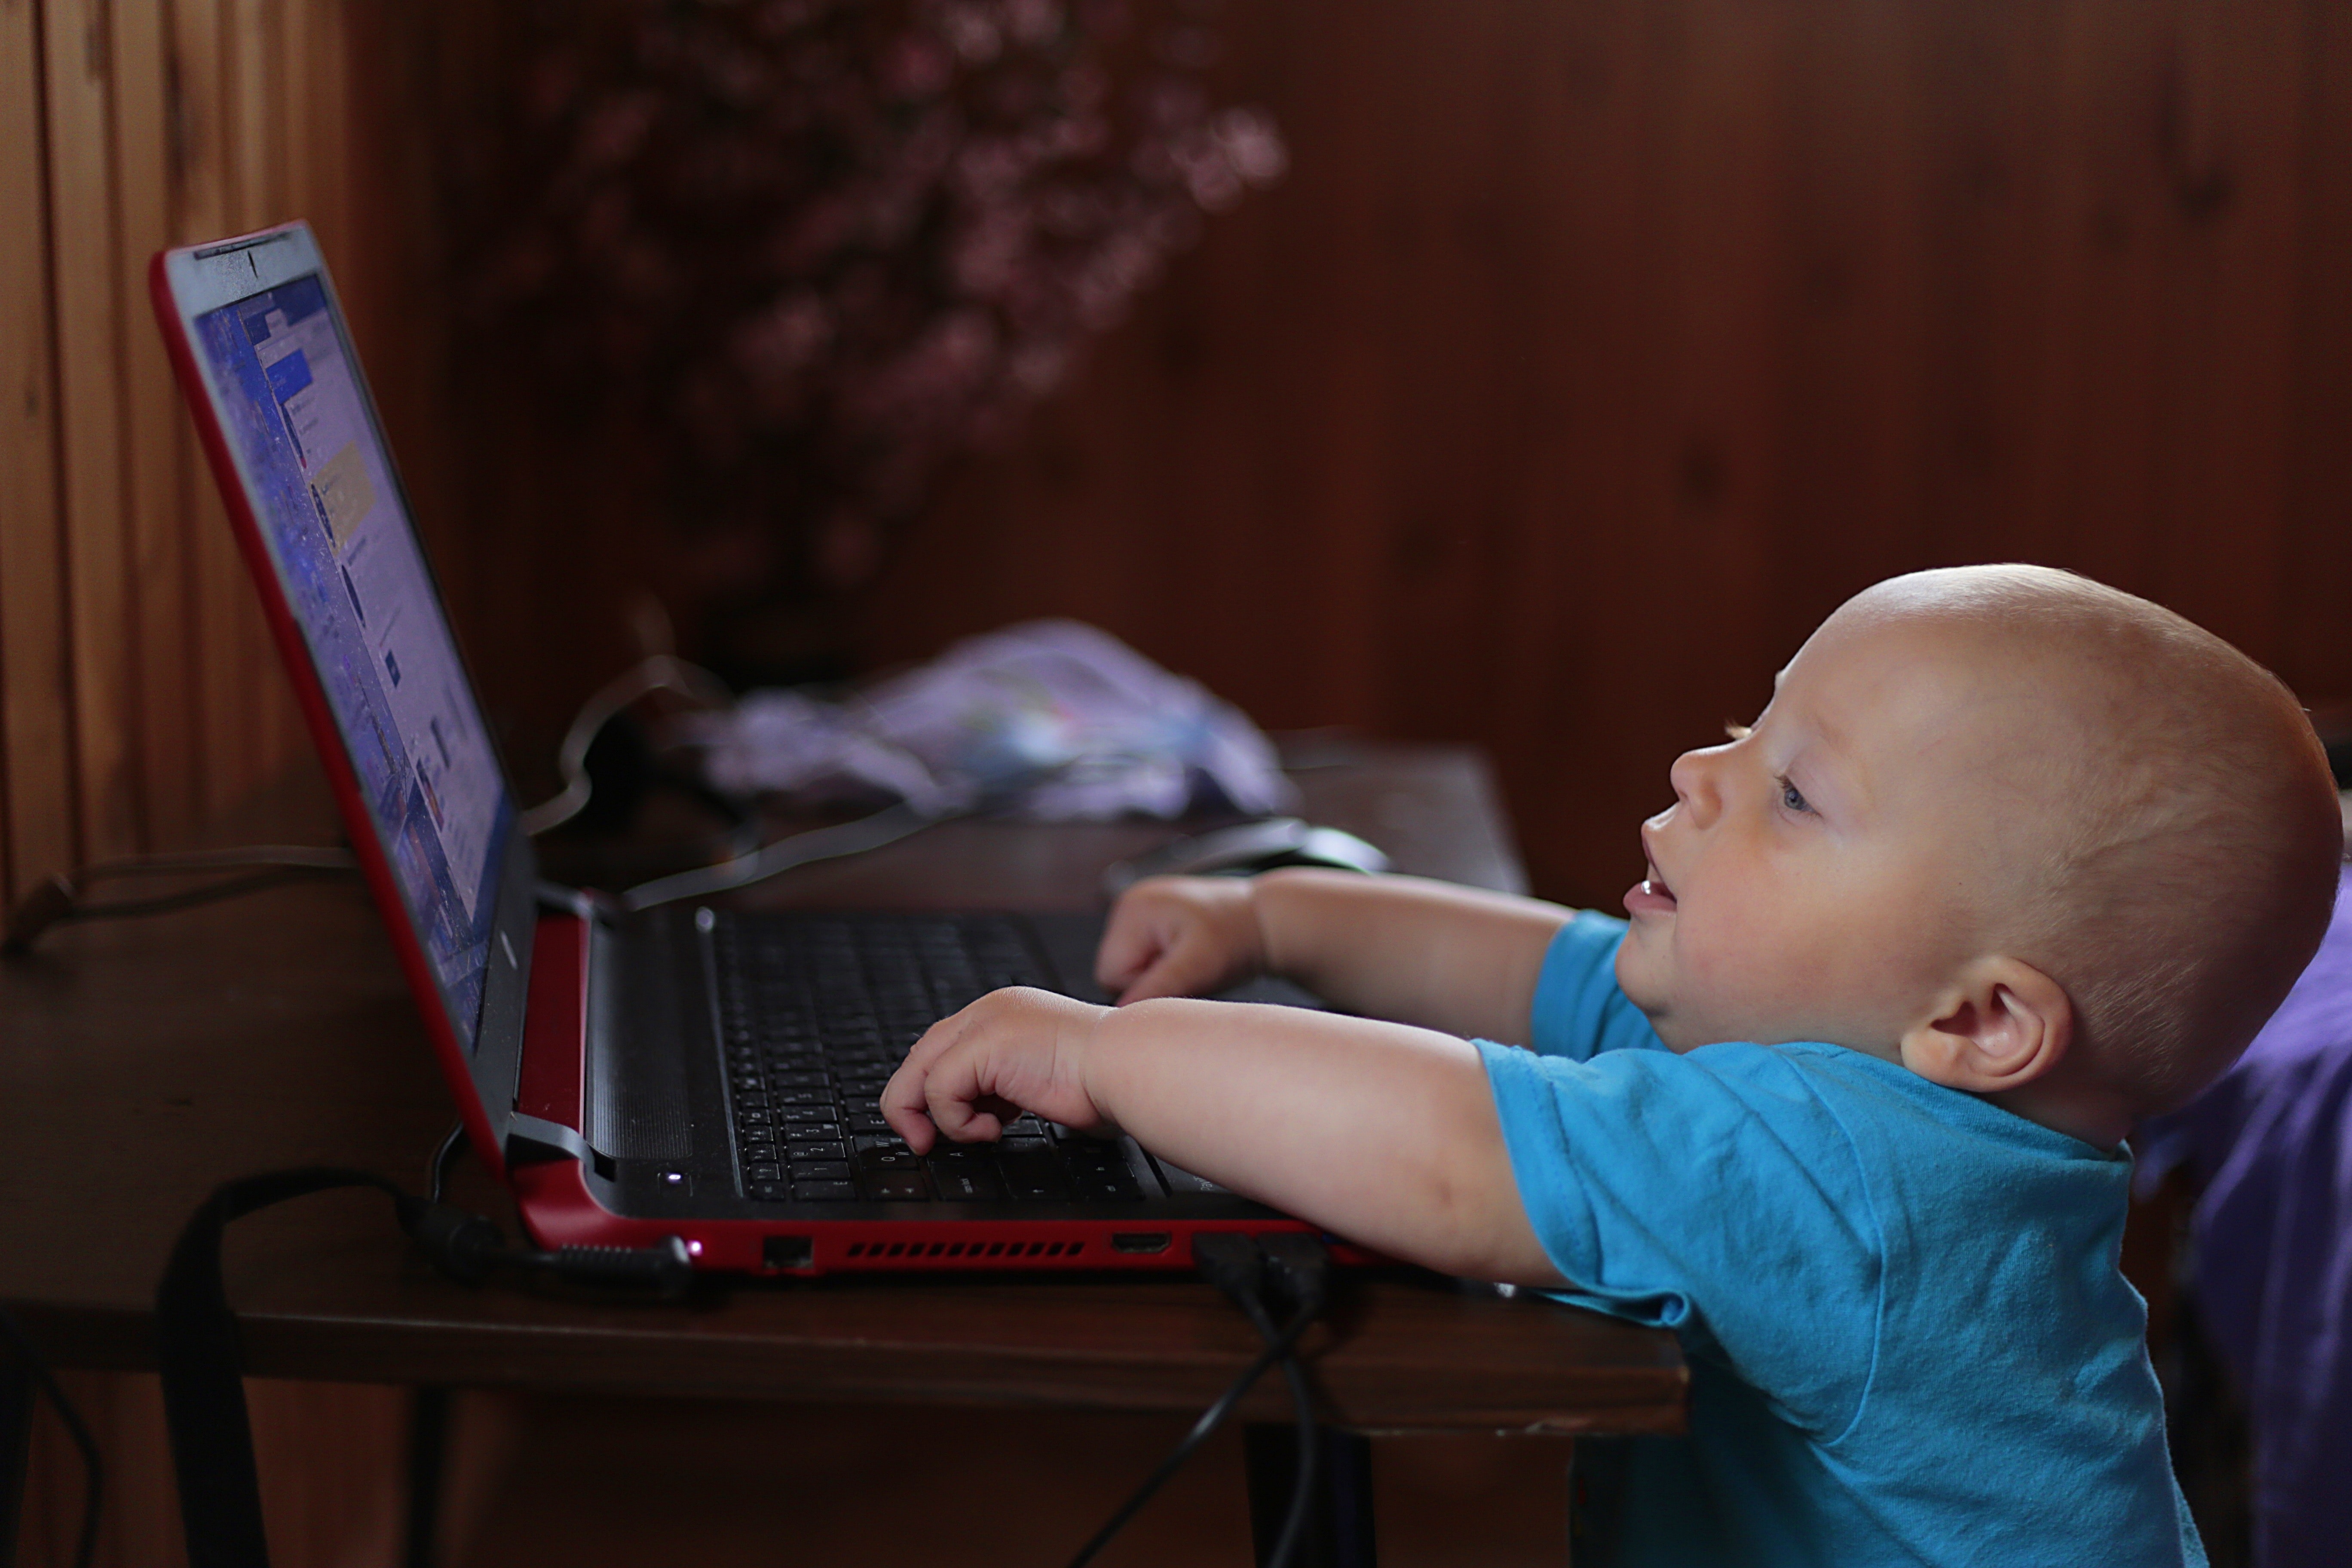 Boy Wearing Blue T Shirt Using Black Laptop Computer in a Dim Lighted Scenario, Baby, Boy, Child, Computer, HQ Photo